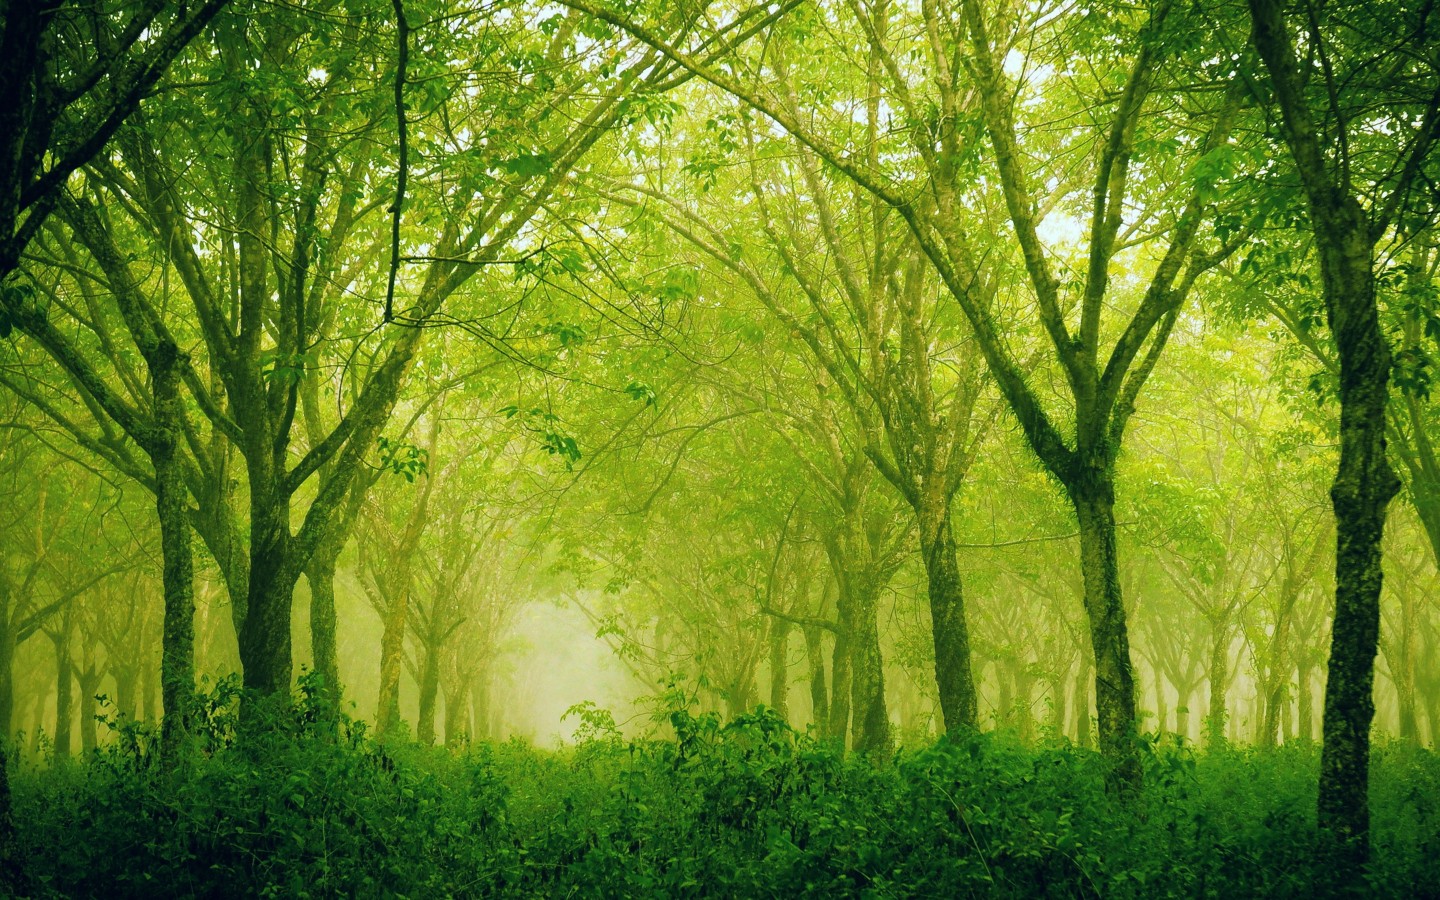 Hd wallpaper sublime silence forest for 2880 x 1800 retina display 1440x900